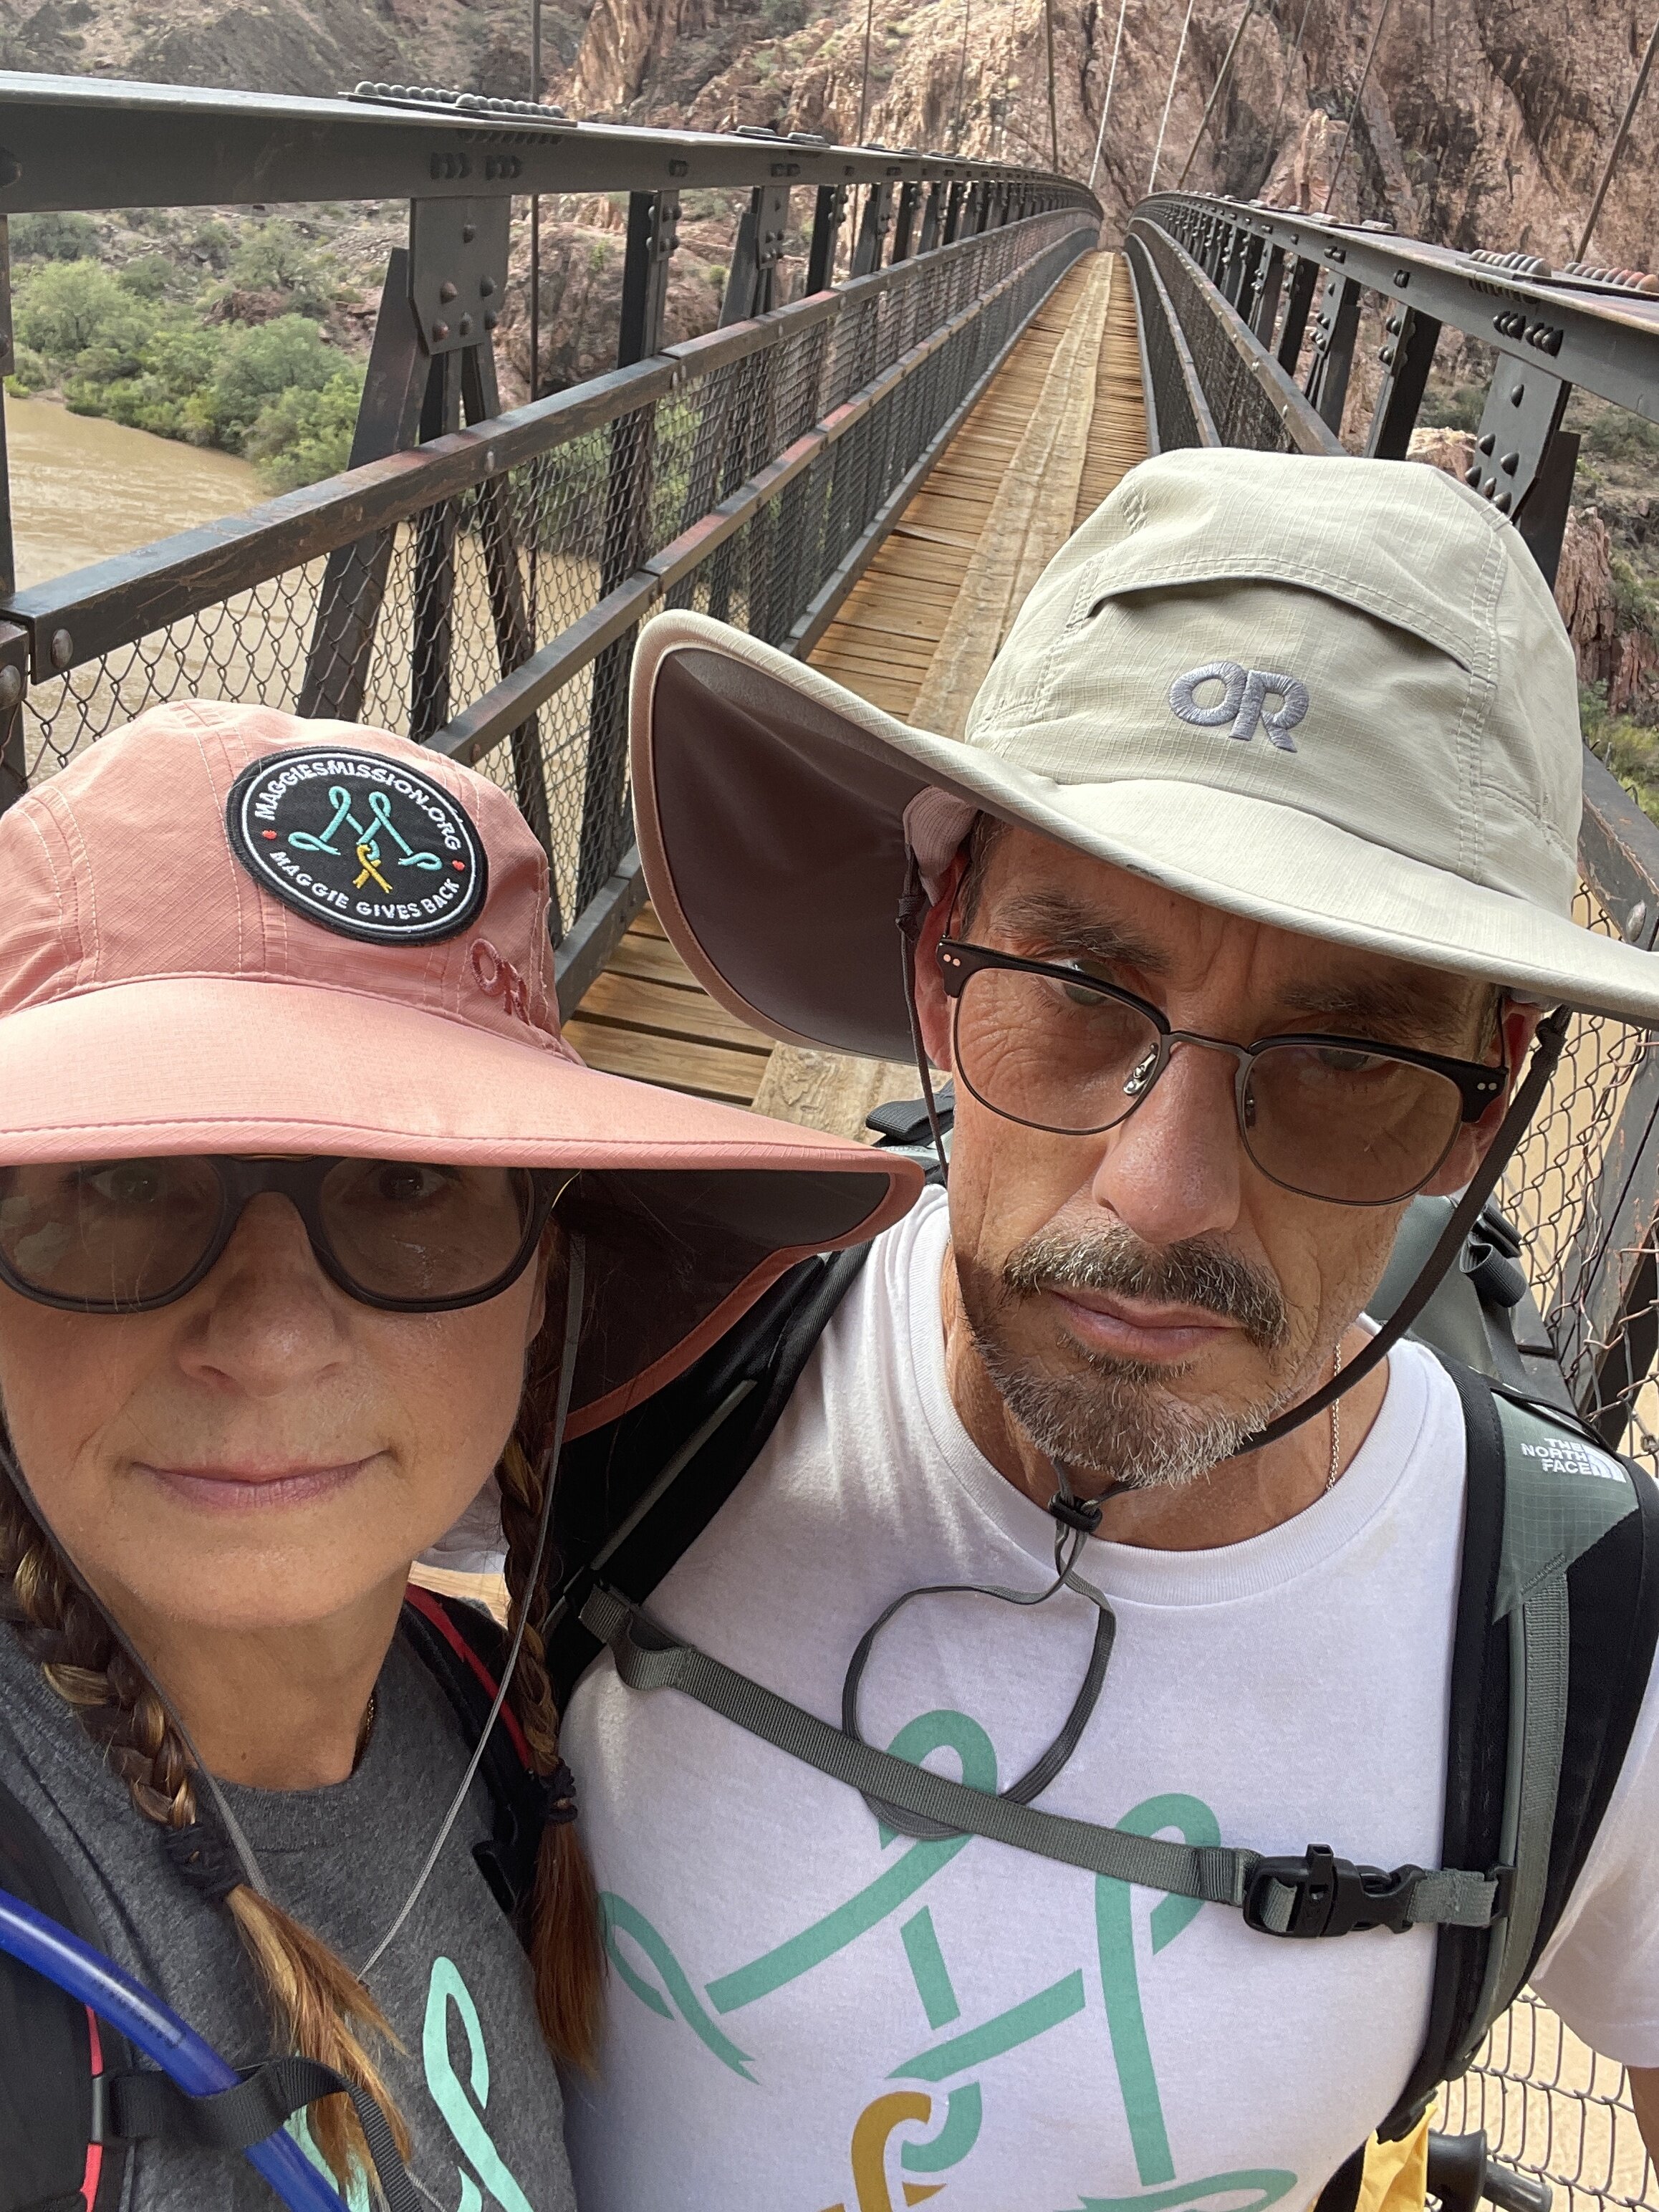 On the Kaibab Trail Suspension Bridge where Maggie made her happy video on August 19th, 2014. 